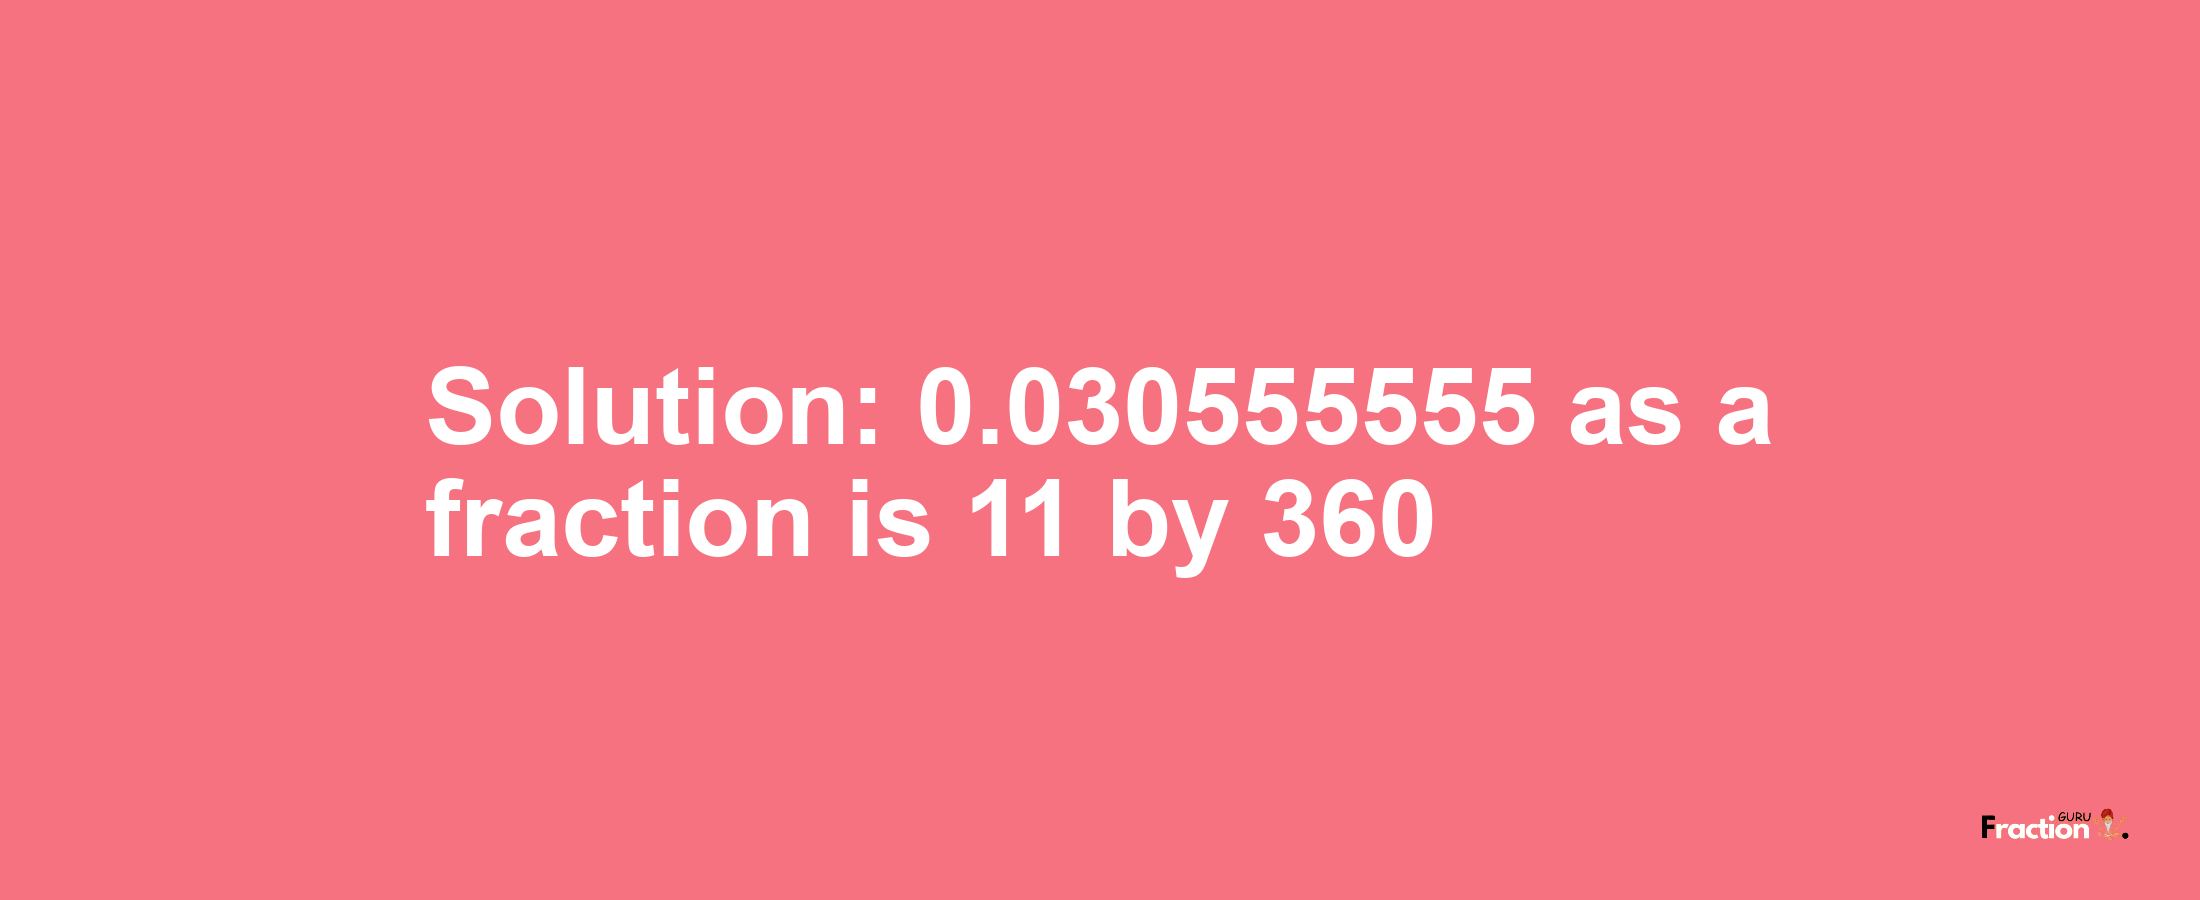 Solution:0.030555555 as a fraction is 11/360